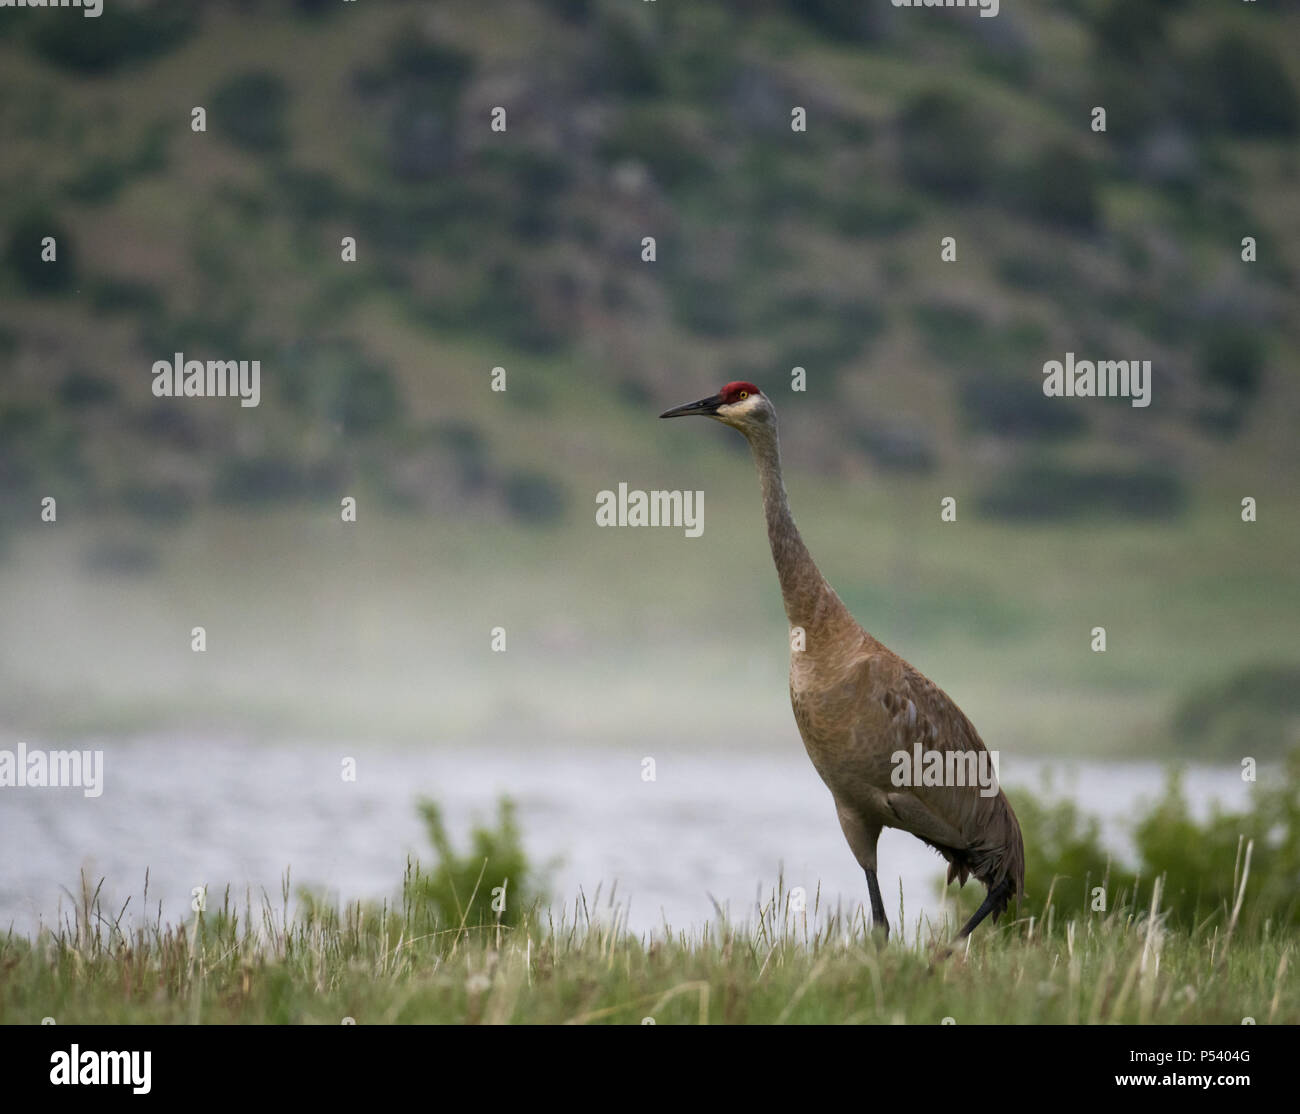 A single adult sandhill crane with tan and gray feathers and a crimson cap standing in a field with a river in the background. Shallow depth of field. Stock Photo